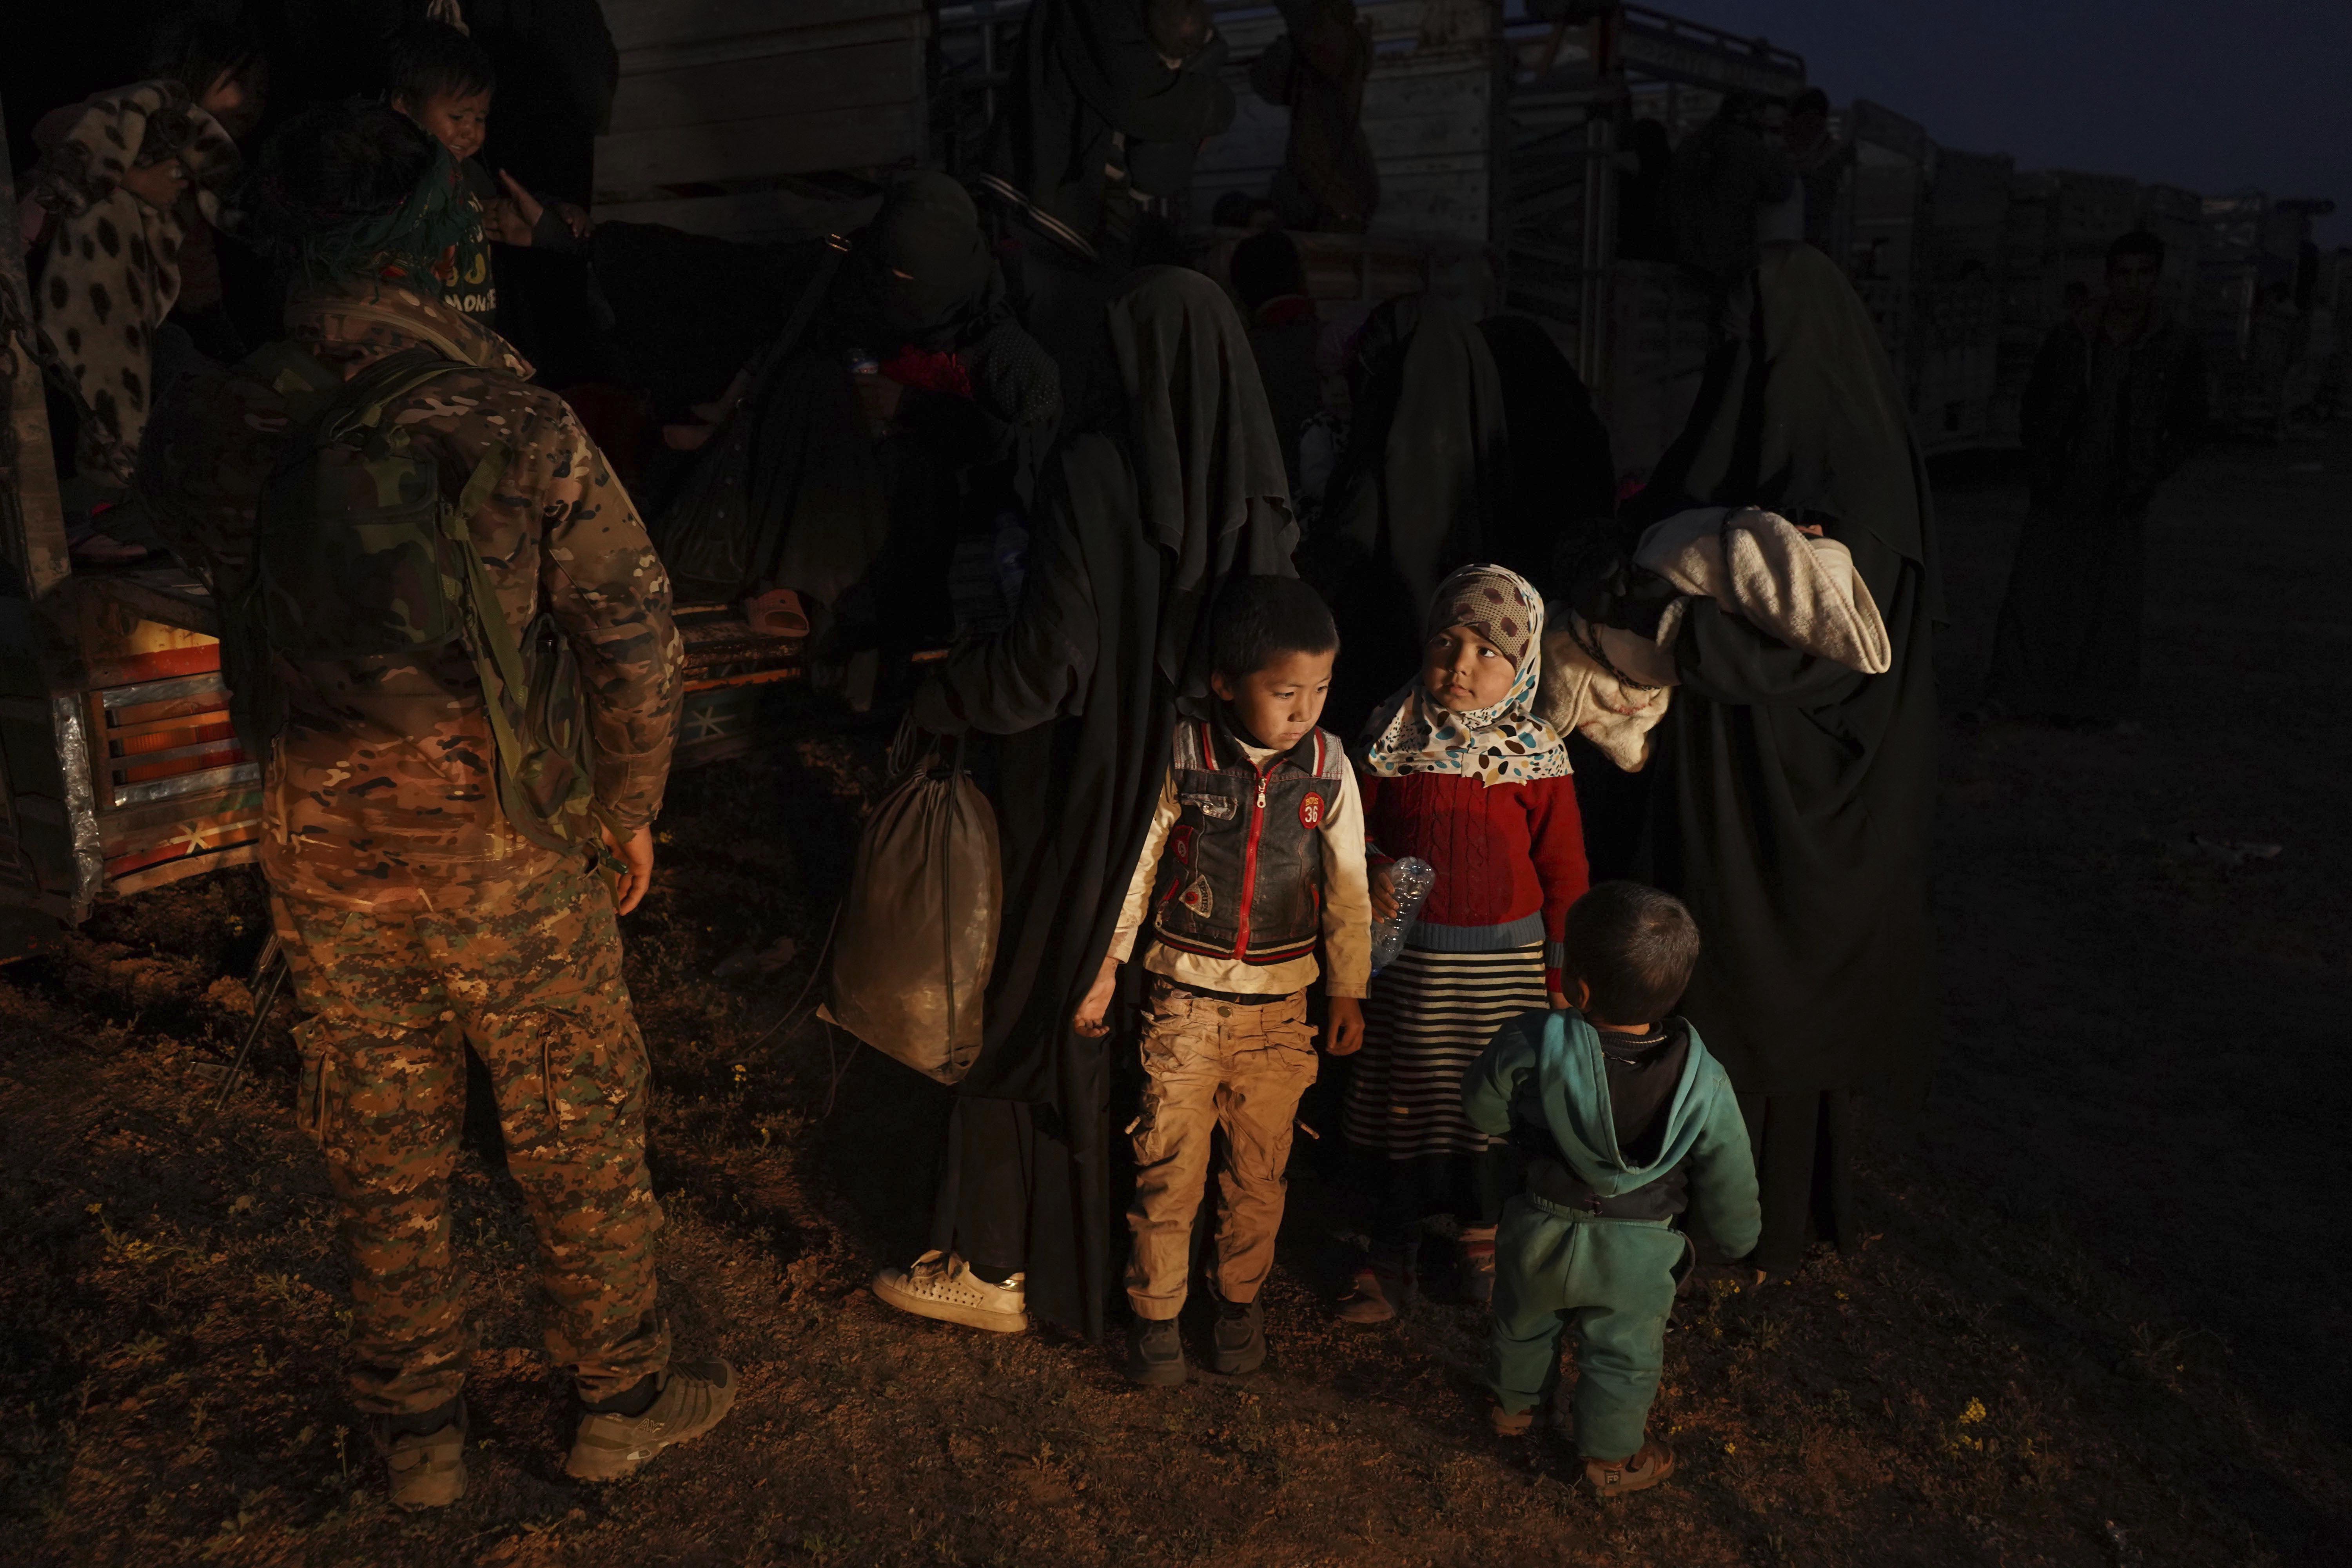 U.S.-backed Syrian Democratic Forces (SDF) move women and children into a truck after being evacuated out of the last territory held by Islamic State militants, outside Baghouz, Syria, Monday, March 4, 2019.  Photo: AP